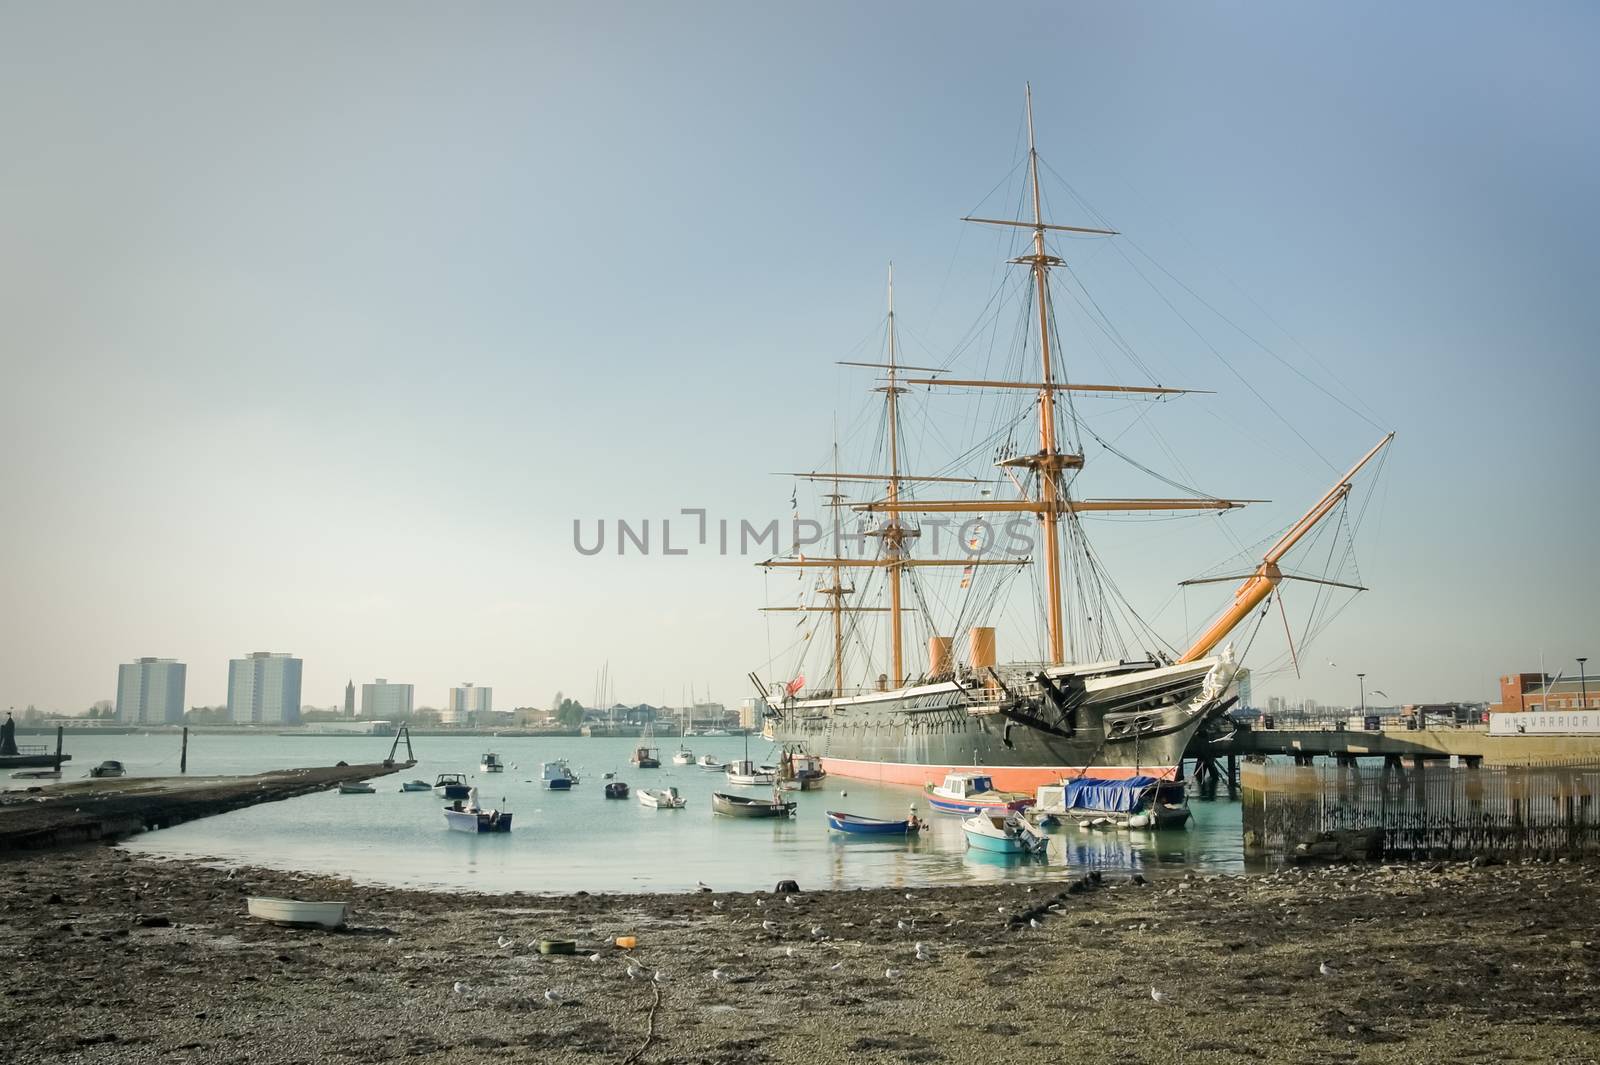 Portsmouth, UK - February 1, 2012: HMS Warrior, the first iron-clad battleship launched by the British Royal in 1860, now a floating museum moored in Portsmouth harbor, UK